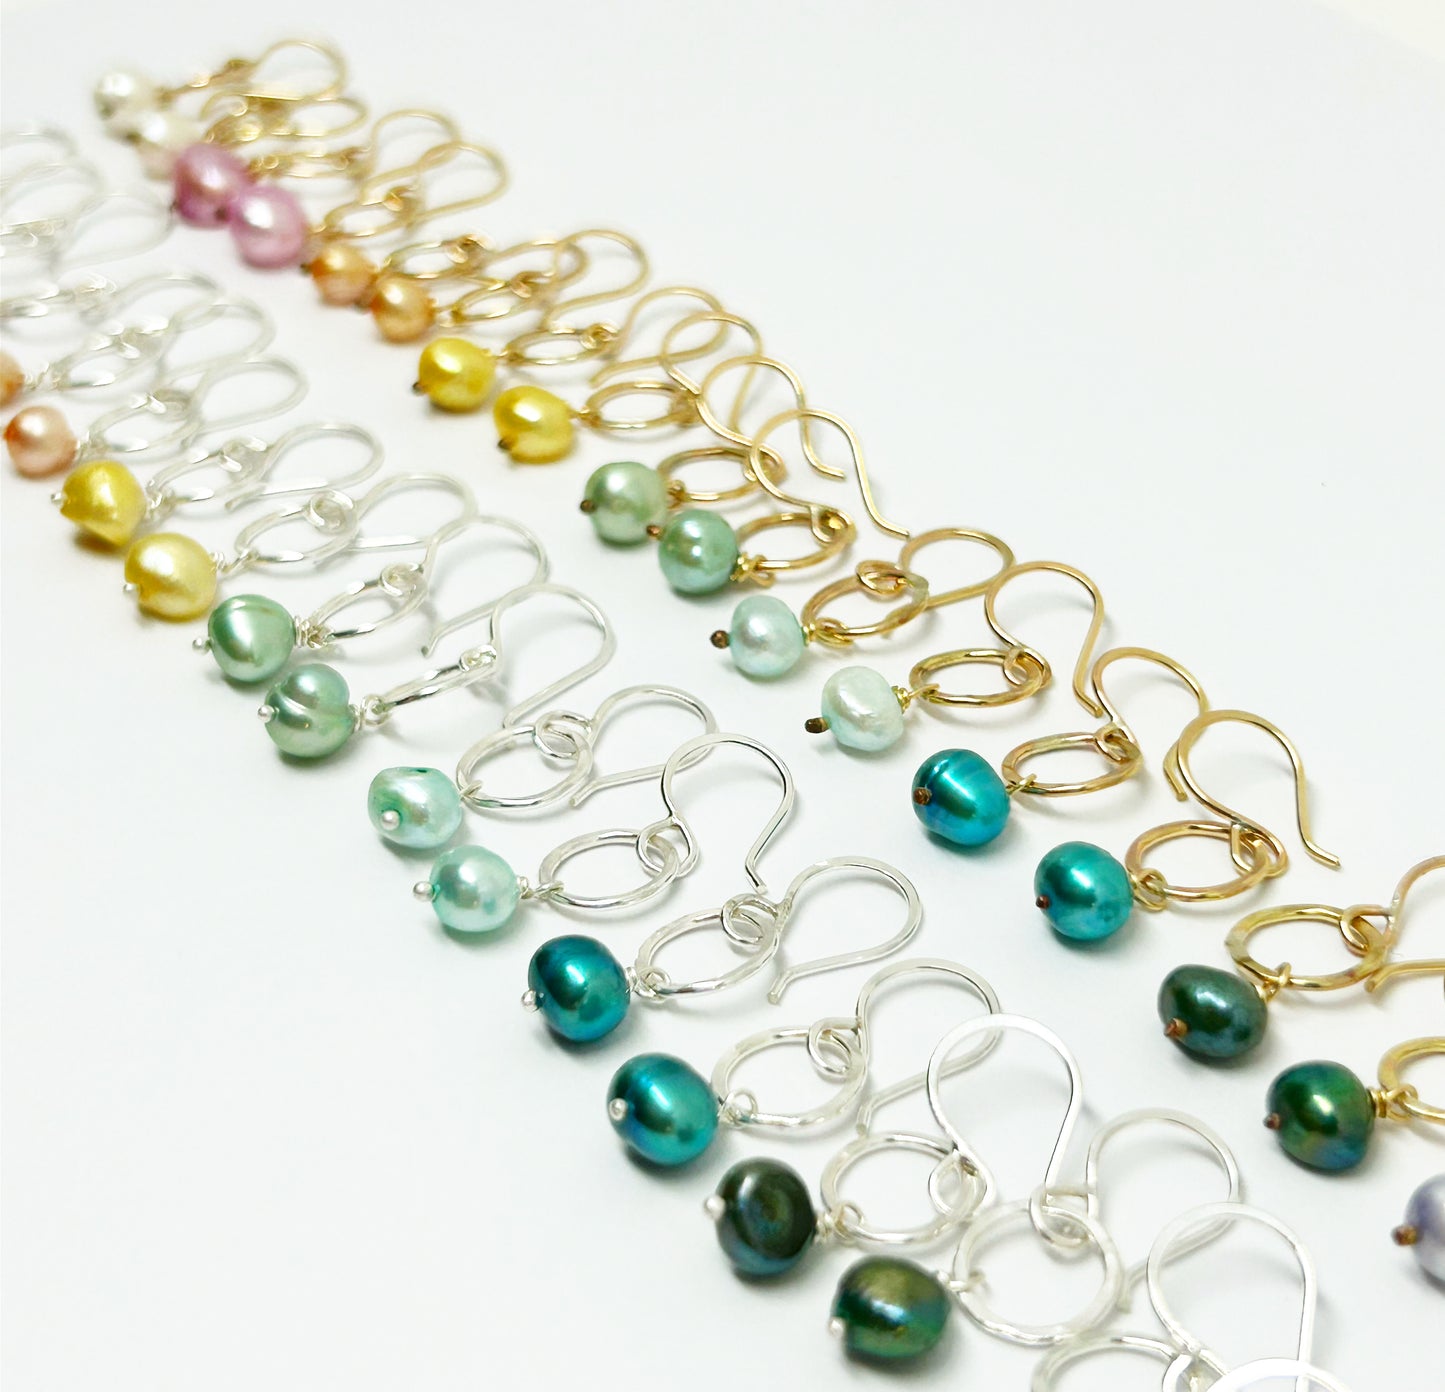 Rainbow collection of Pearl Drop Earrings in Gold Fill and Sterling Silver